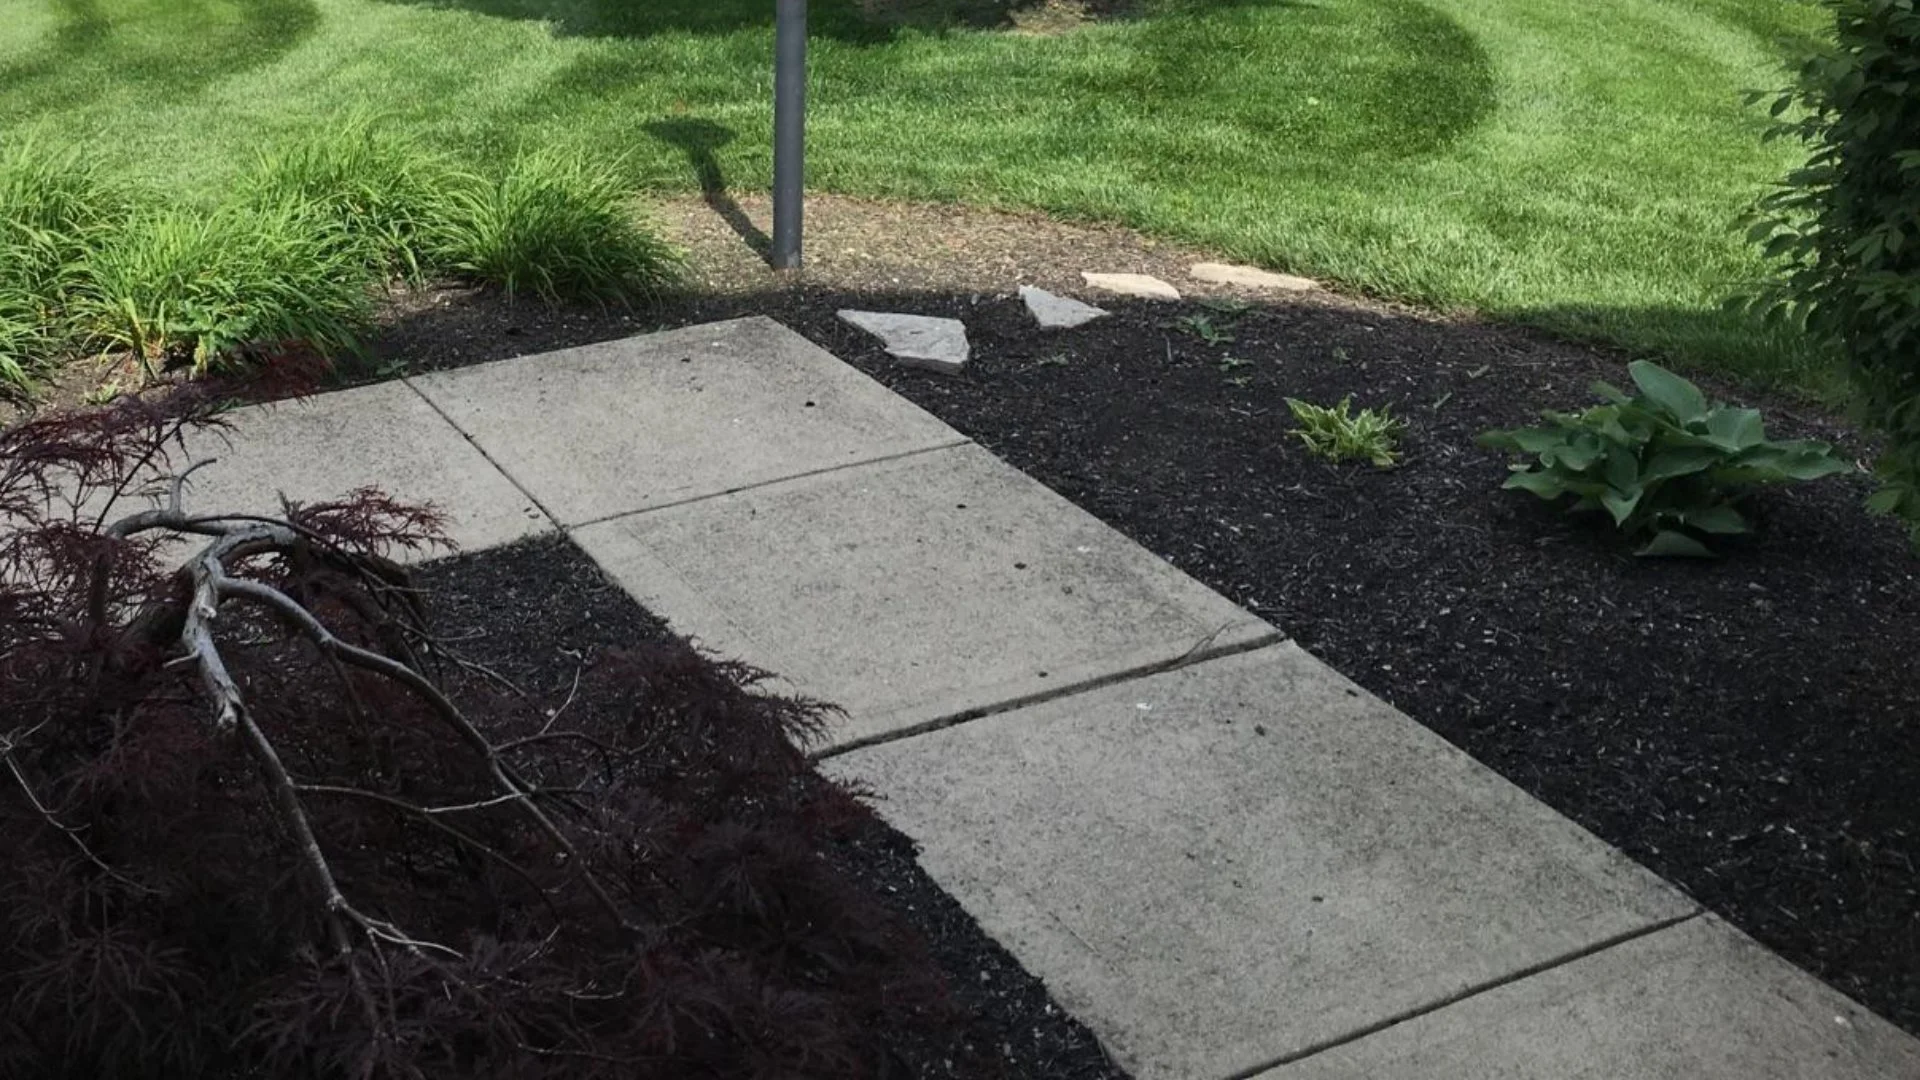 The Benefits of Mulch Go Beyond Aesthetics - It Also Aids in Plant Health!